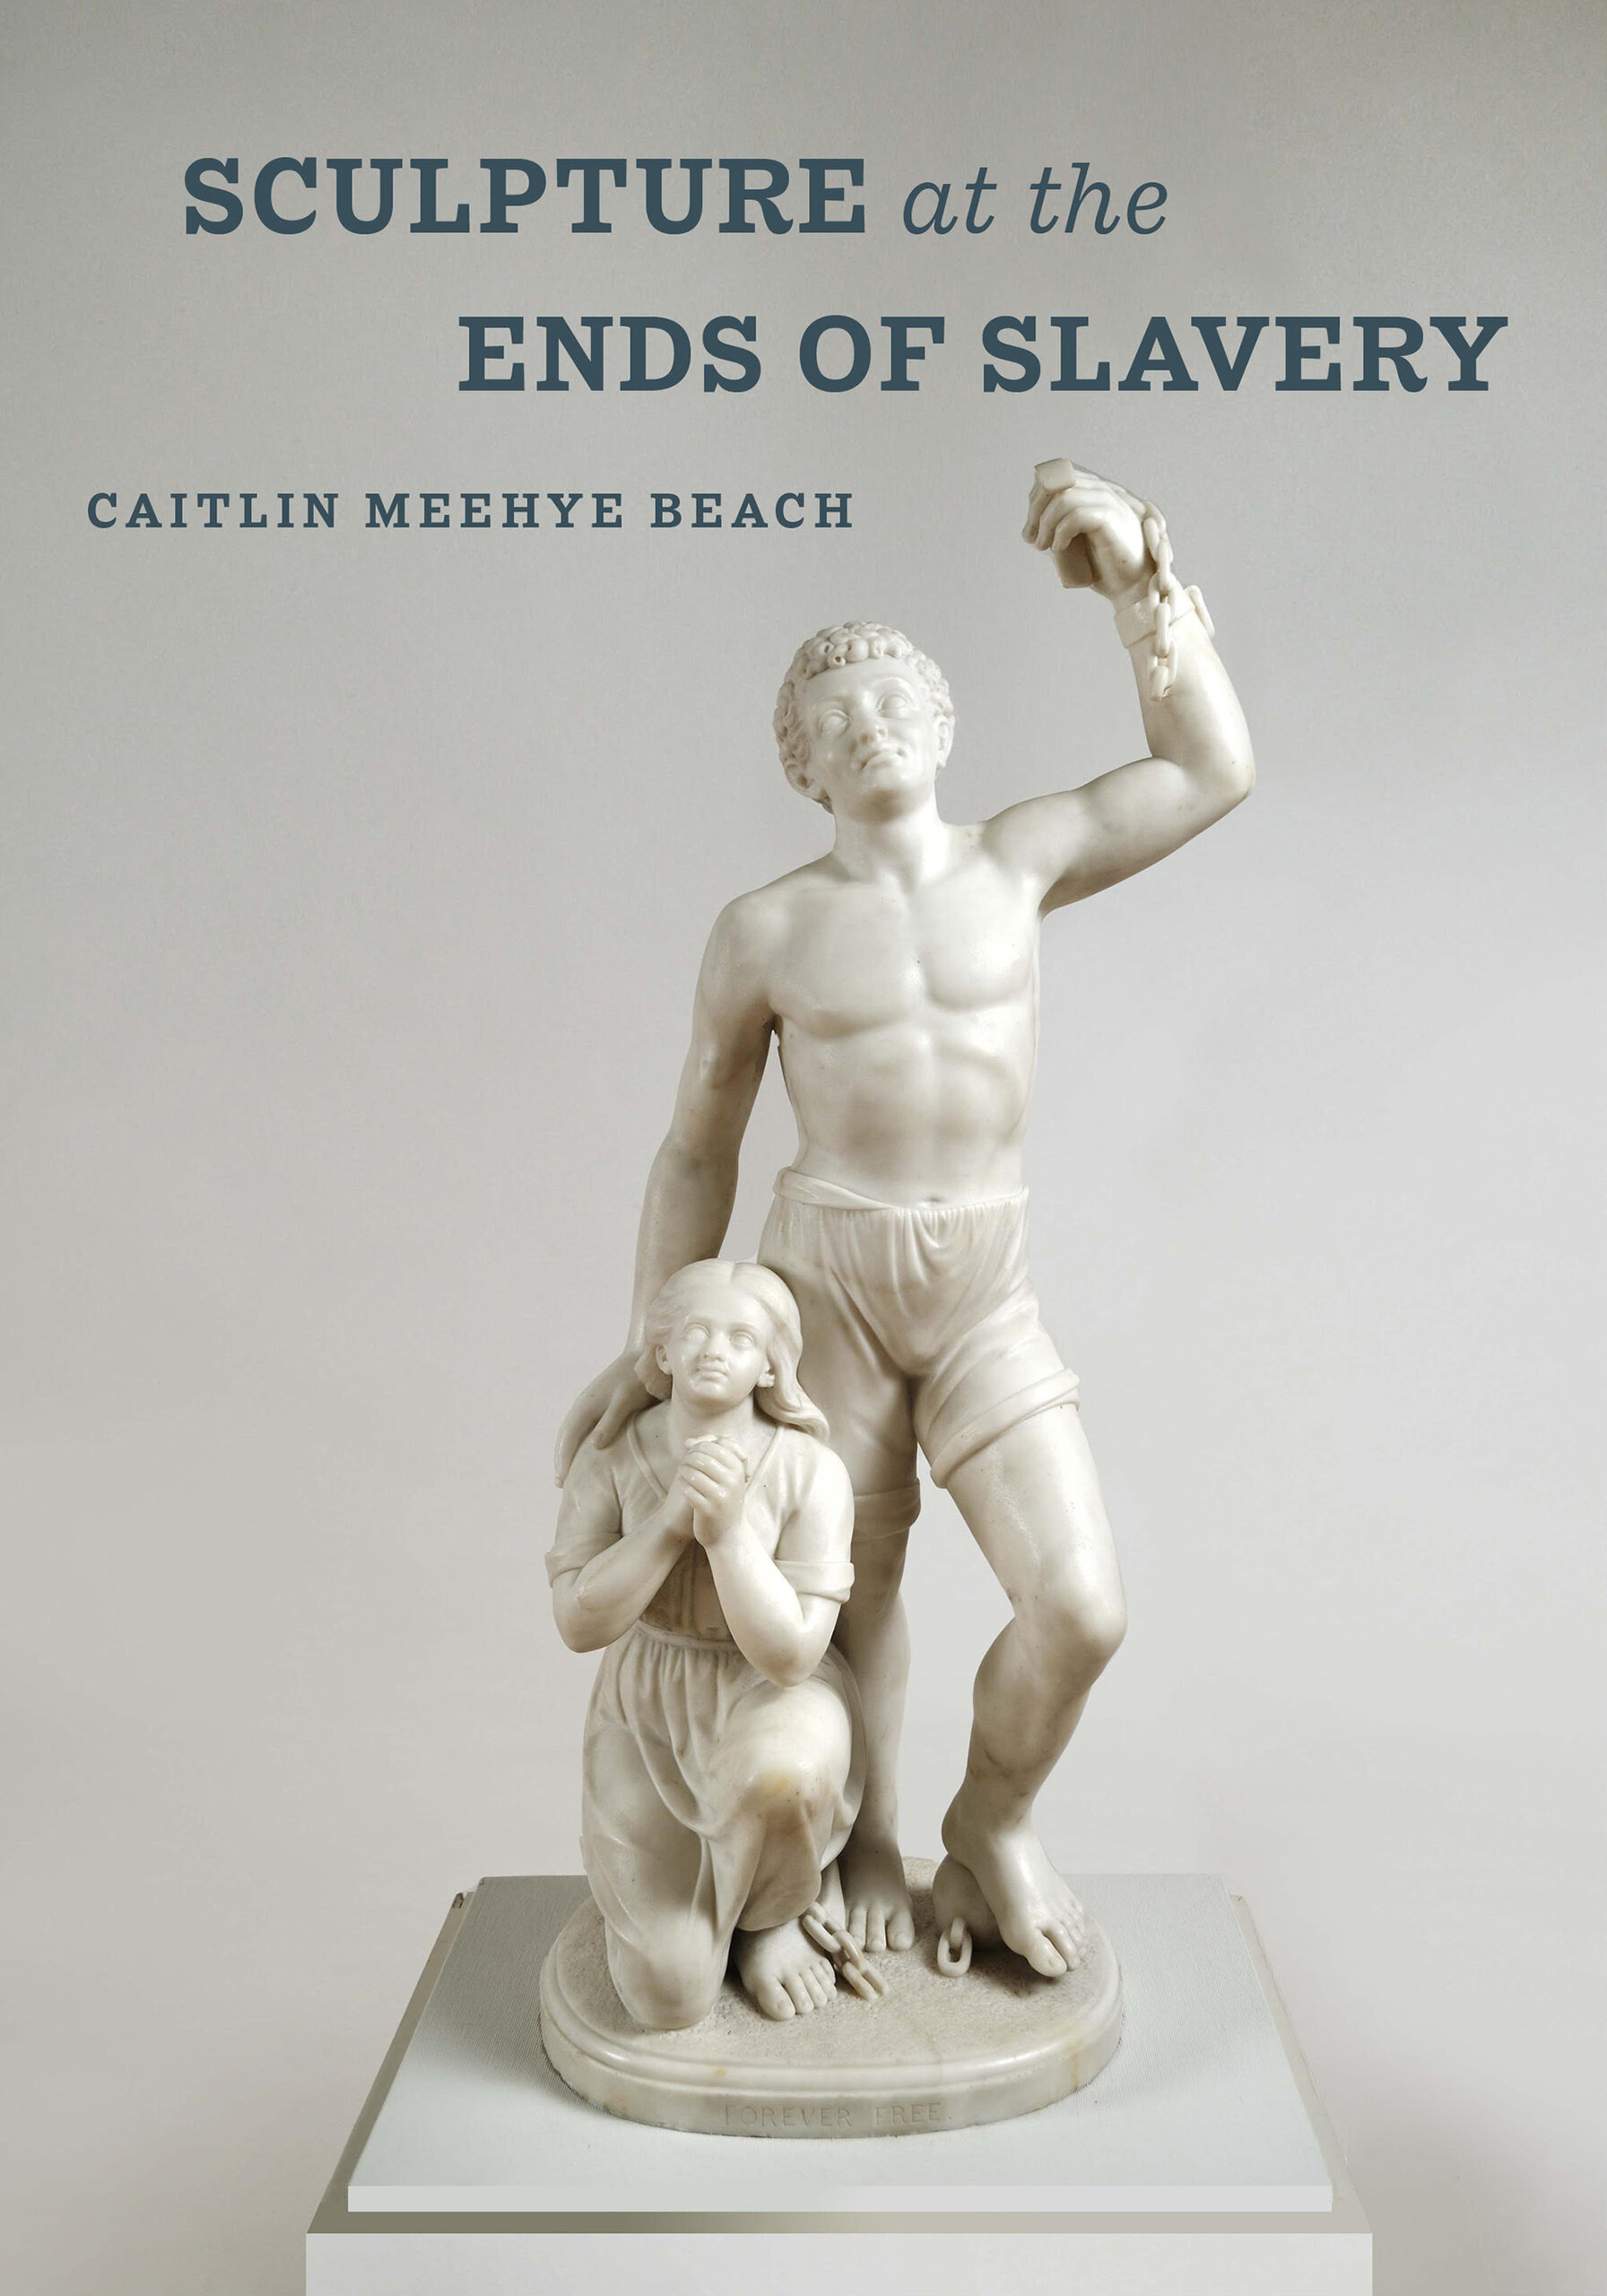 The cover of Caitlin Beech's book "Sculpture at the Ends of Slavery"